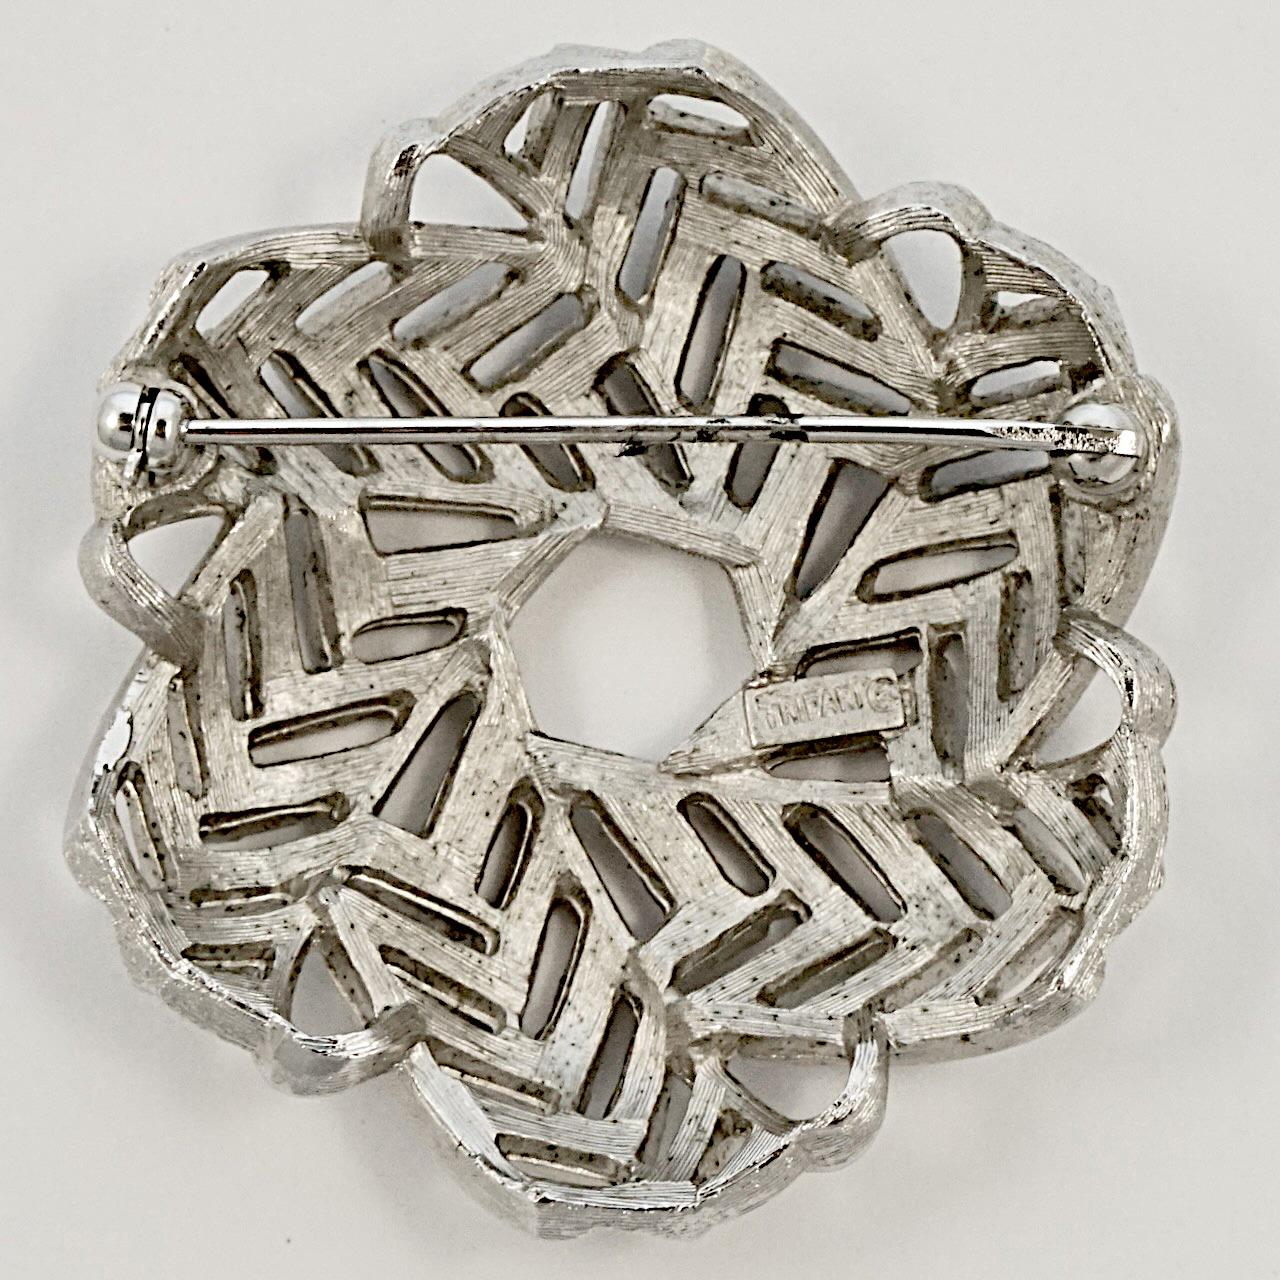 Trifari silver plated brushed and shiny brooch, featuring a beautiful woven design. Measuring diameter 4.6 cm / 1.8 inches. The brooch is in very good condition.

This stylish Trifari brooch is circa 1960s.

Trifari was a talented jeweller who was